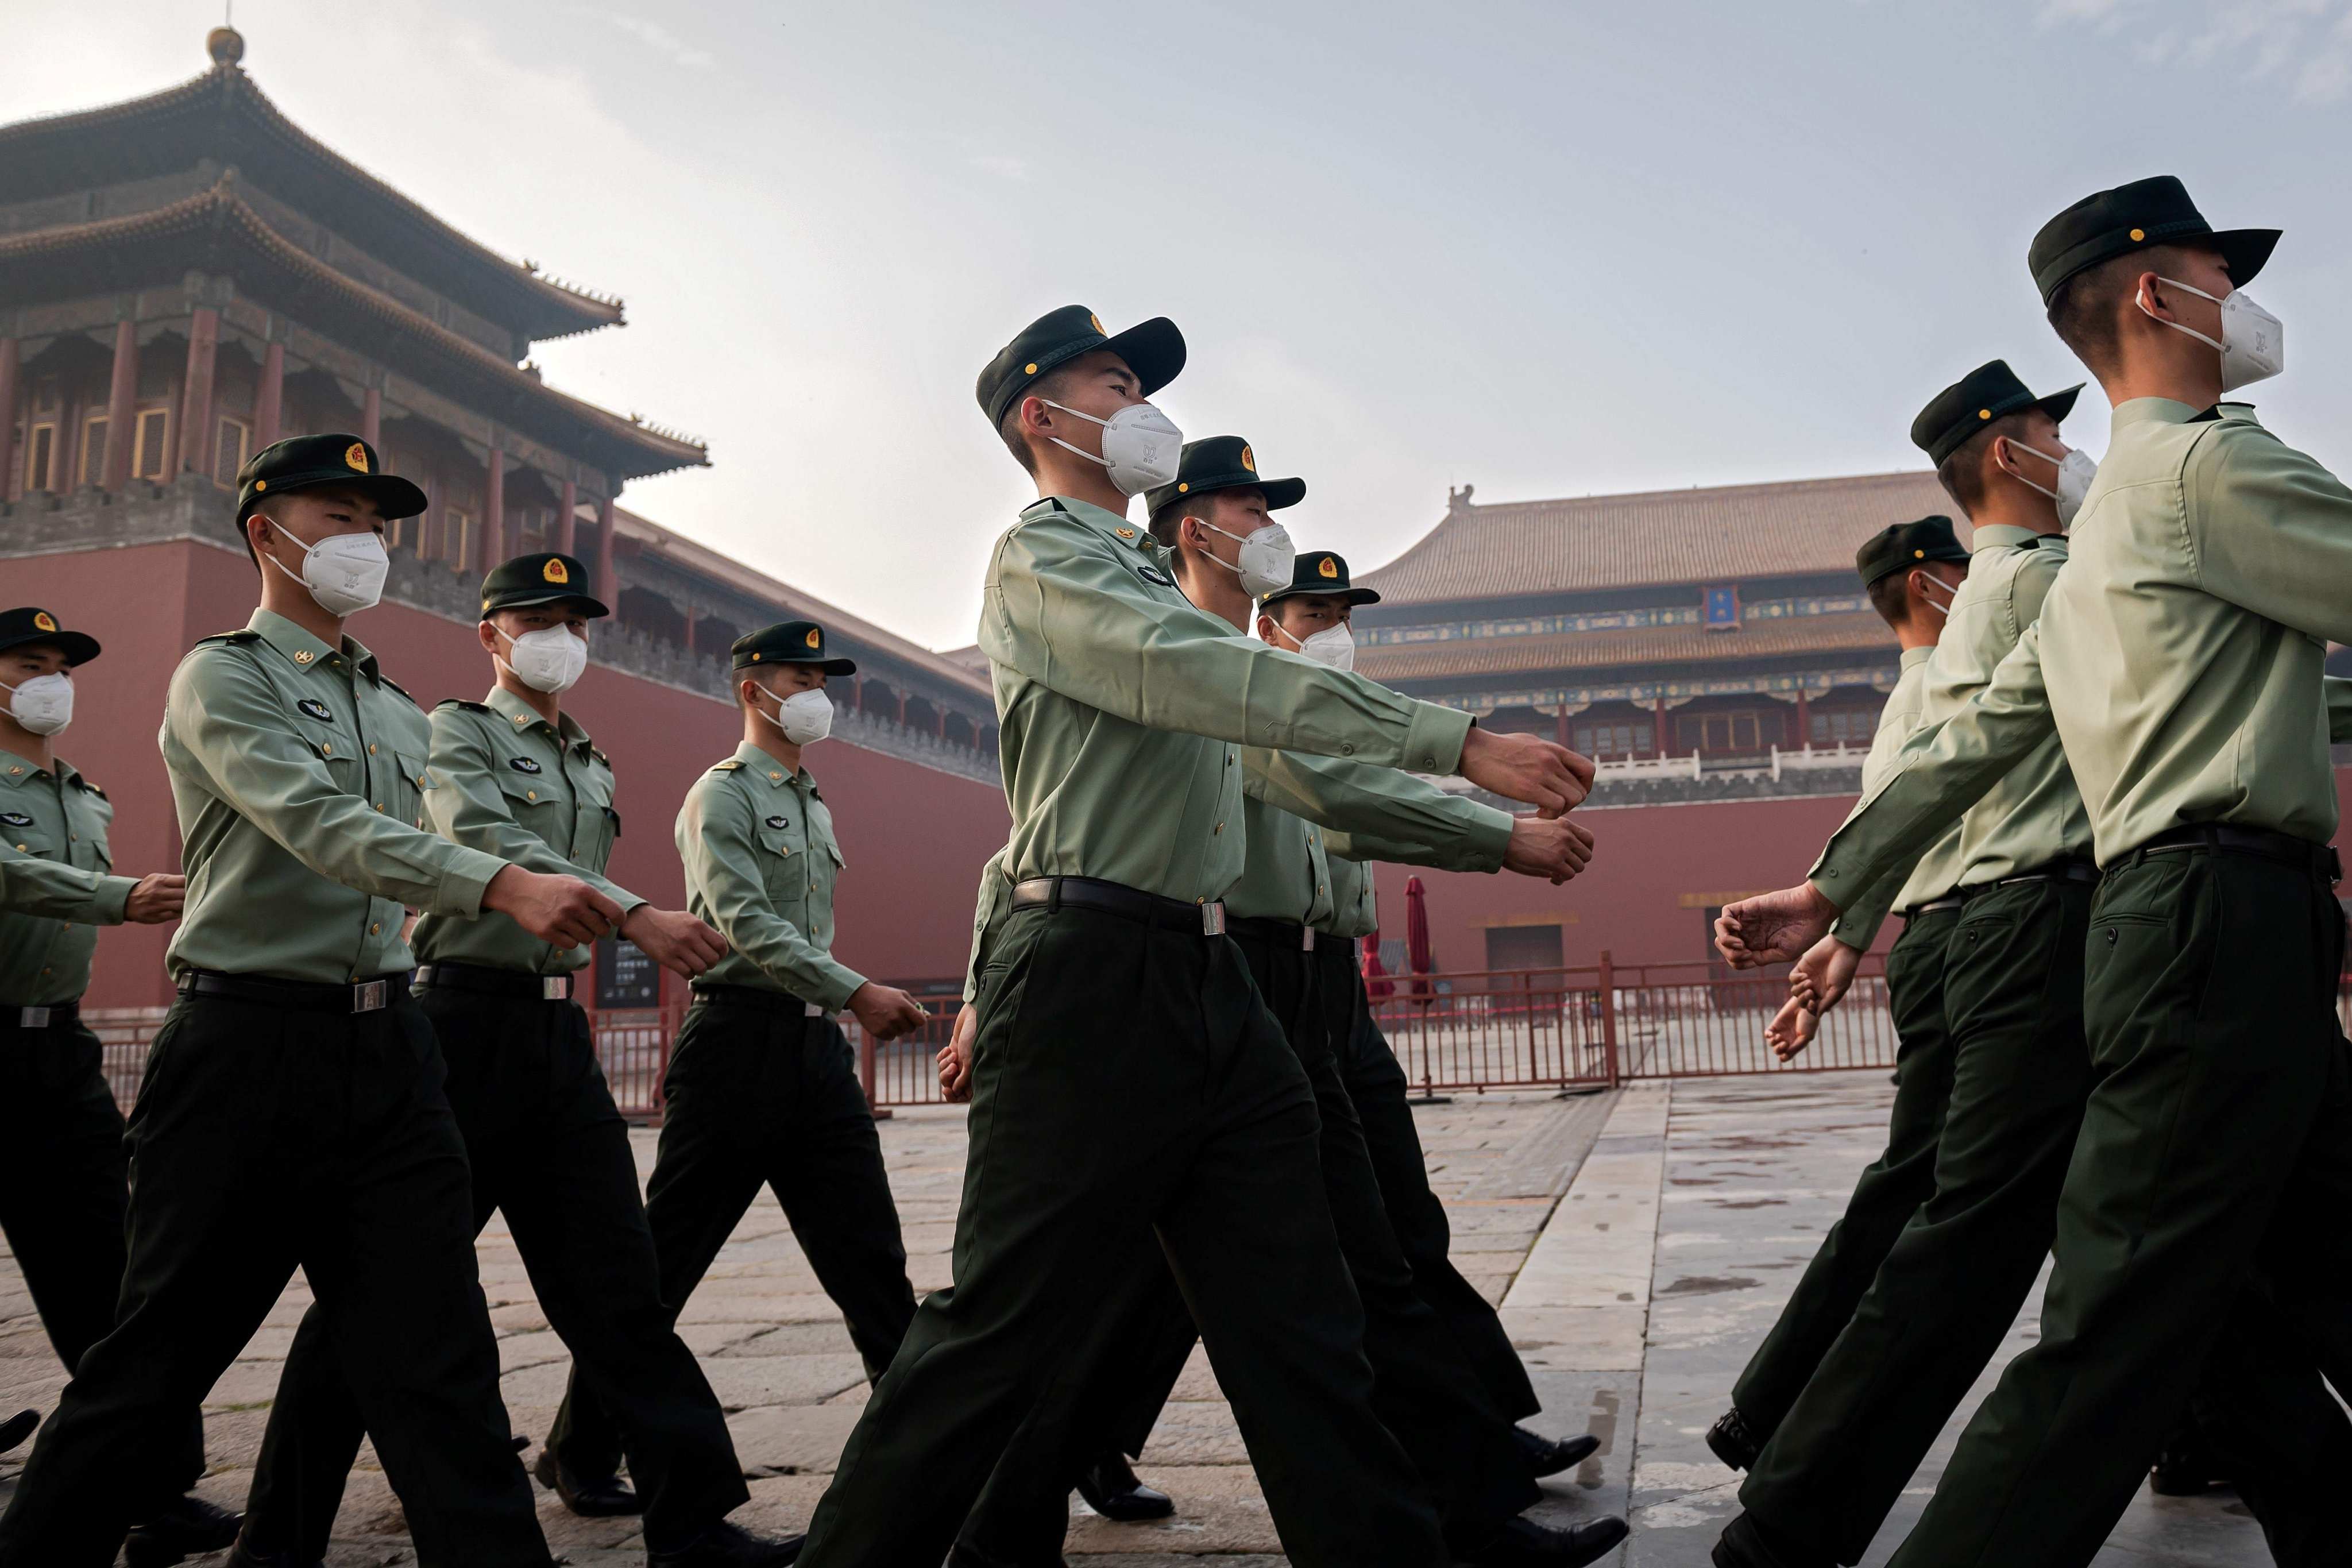 People’s Liberation Army (PLA) soldiers marched next to the entrance to the Forbidden City during the opening ceremony of the Chinese People’s Political Consultative Conference (CPPCC) in Beijing on May 21, 2020. Photo: AFP